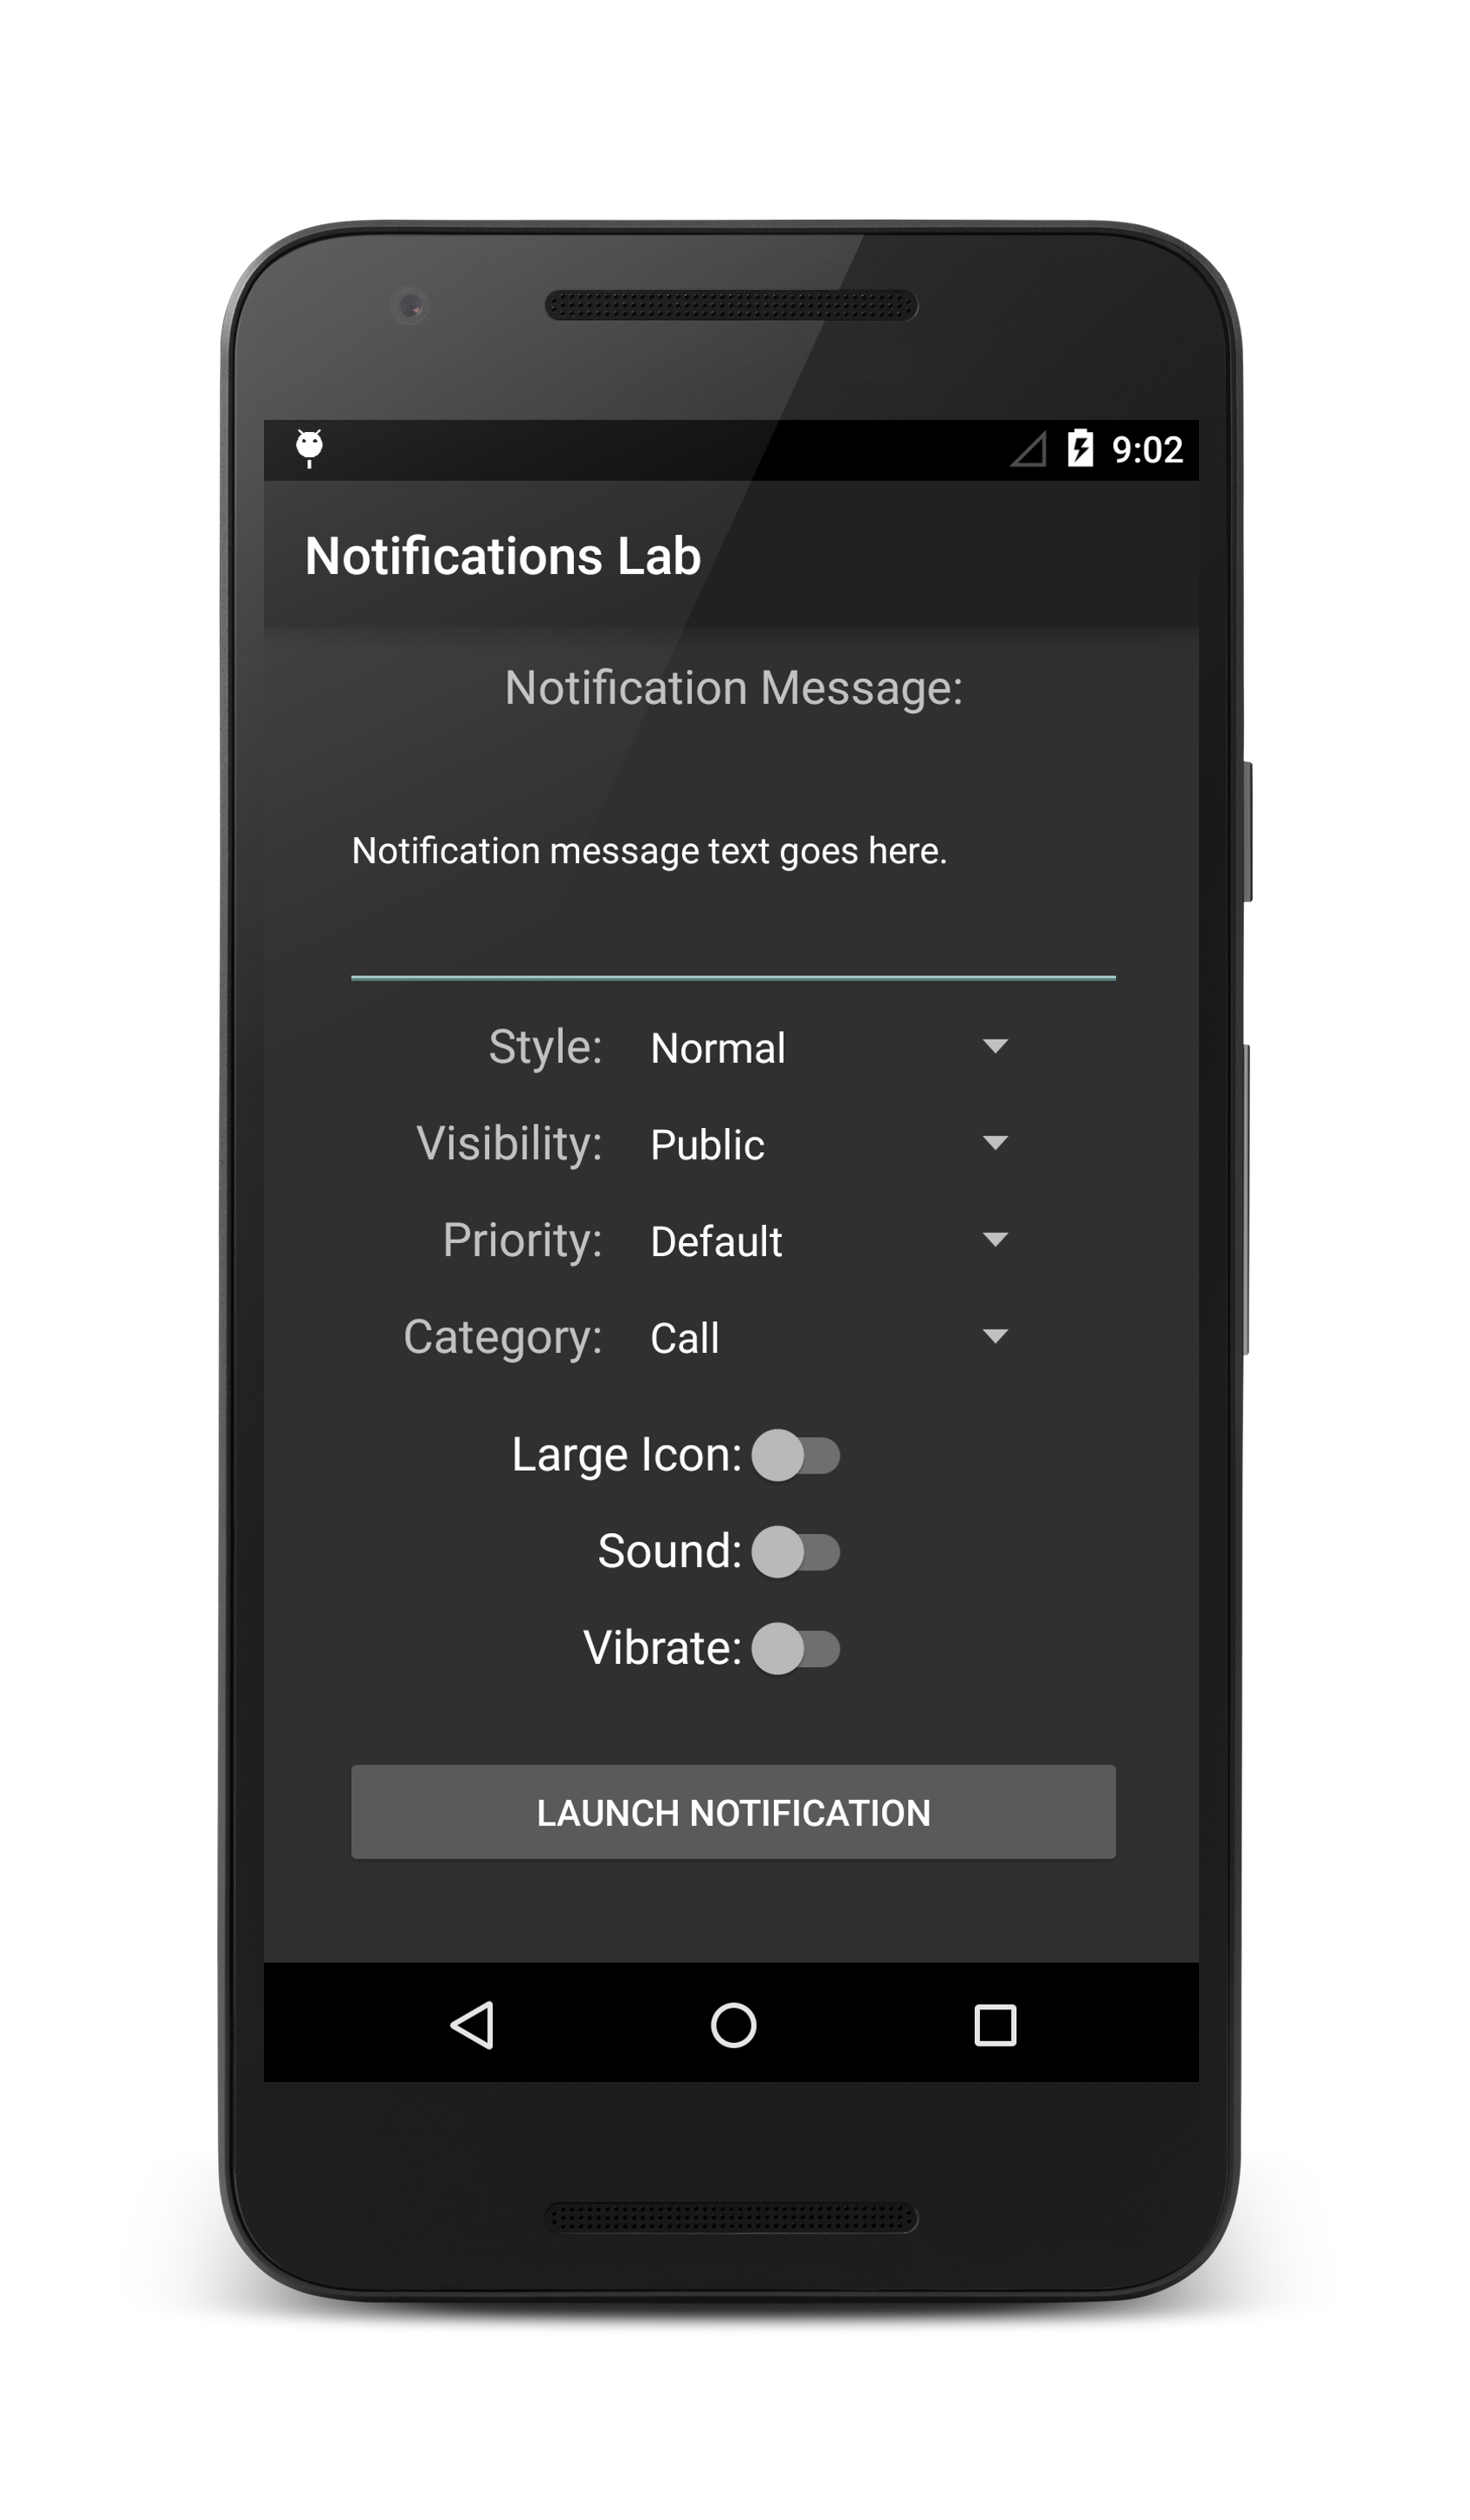 Android 5.0 Notifications Lab application screenshot